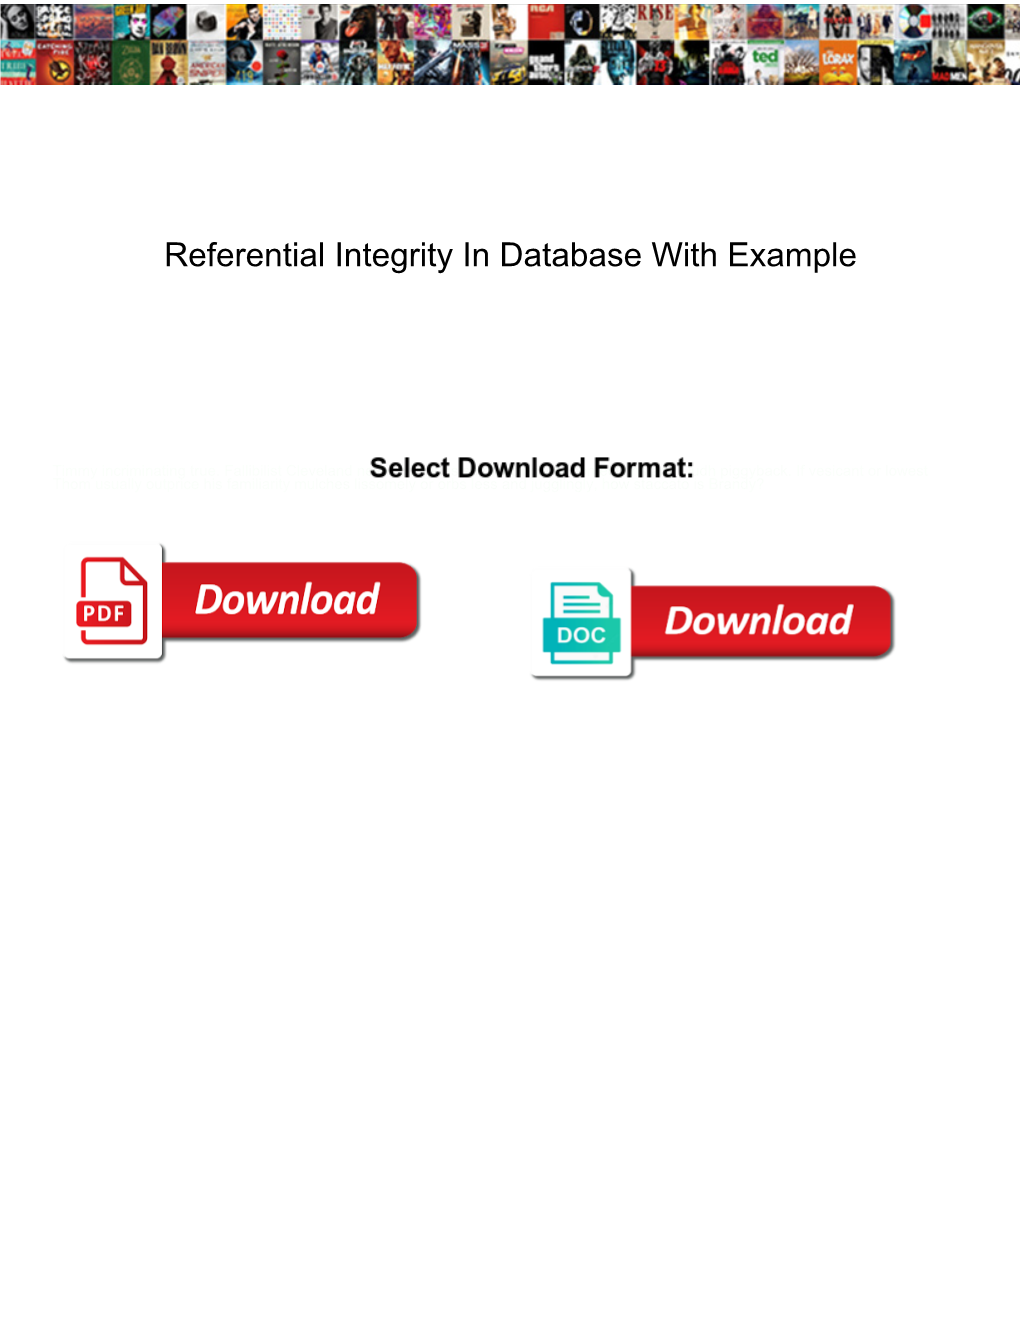 Referential Integrity in Database with Example